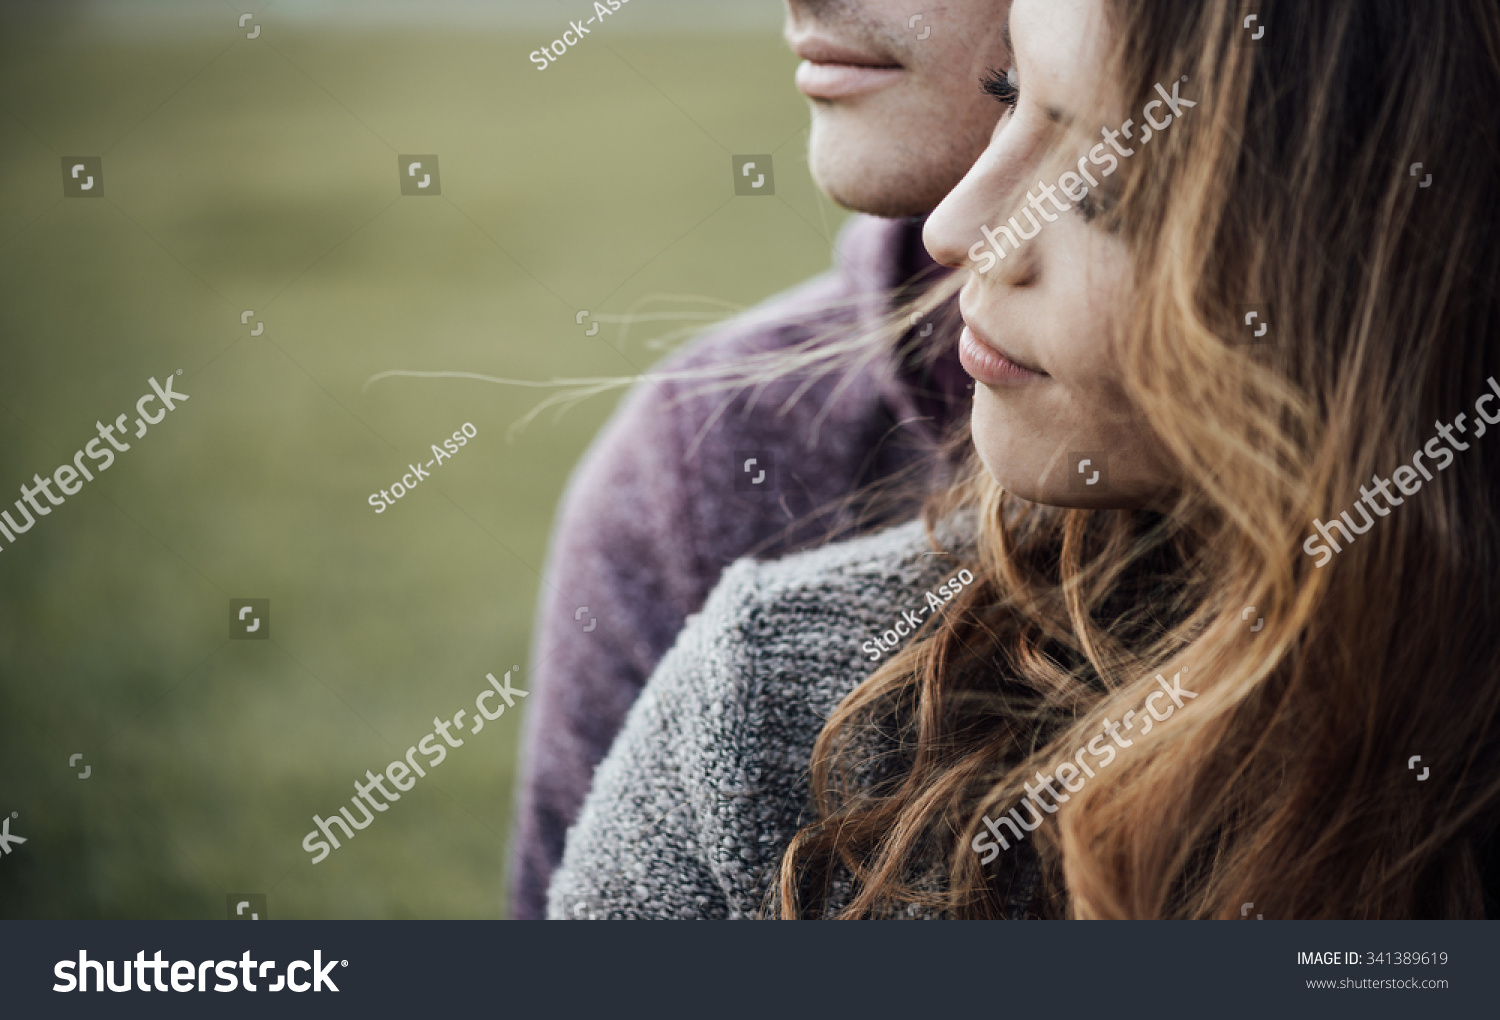 Young loving couple outdoors sitting on grass, hugging and looking away, future and relationships concept #341389619